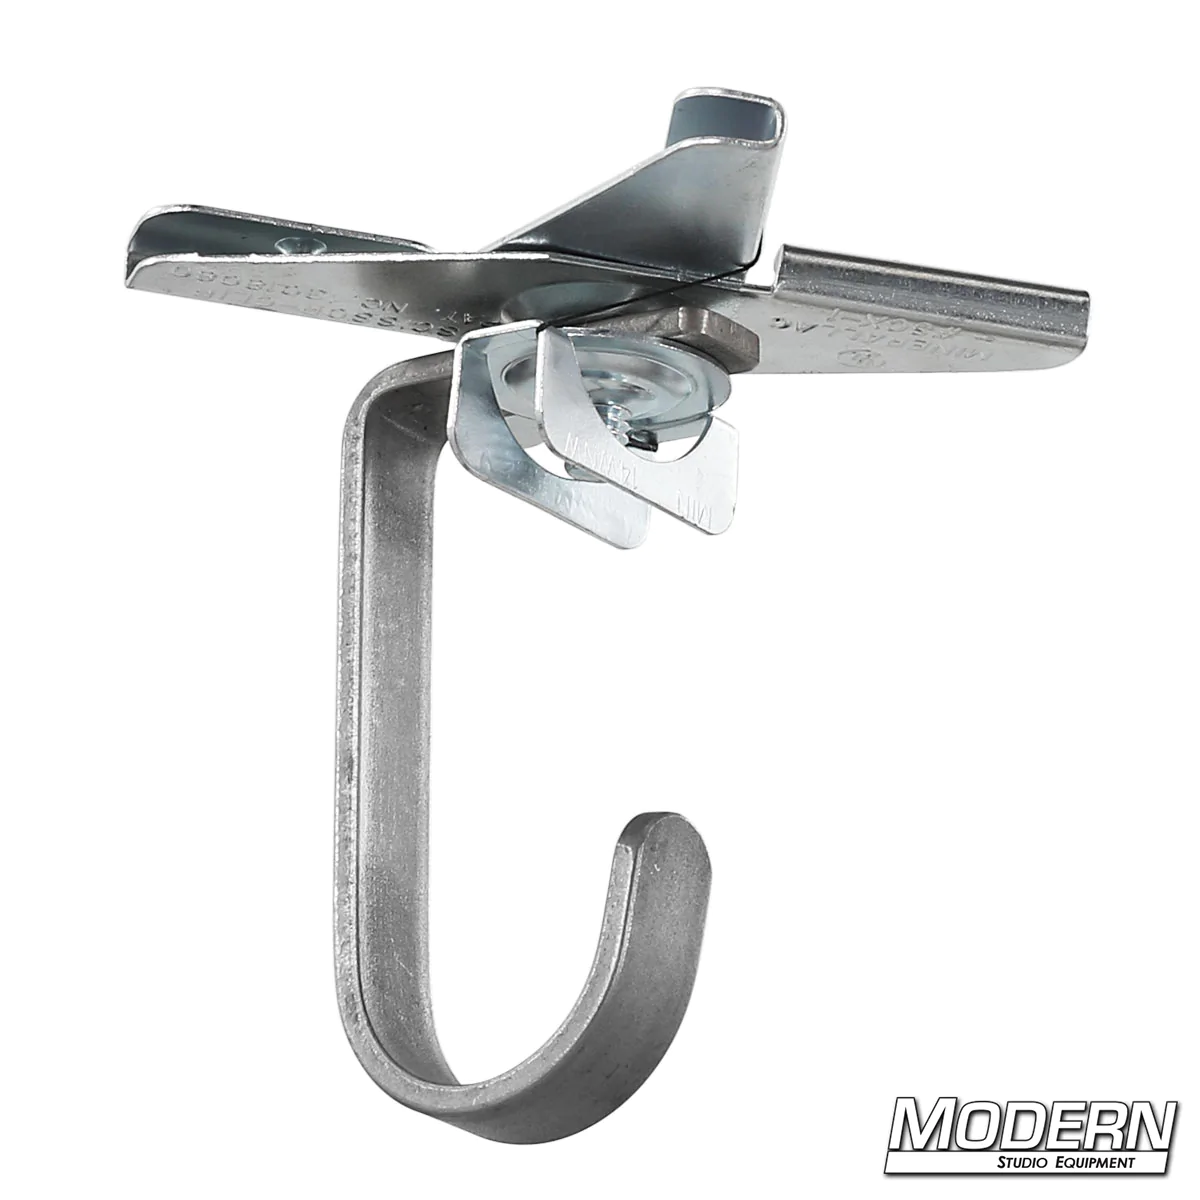 Drop Ceiling Scissor Clamp with Cable Hook